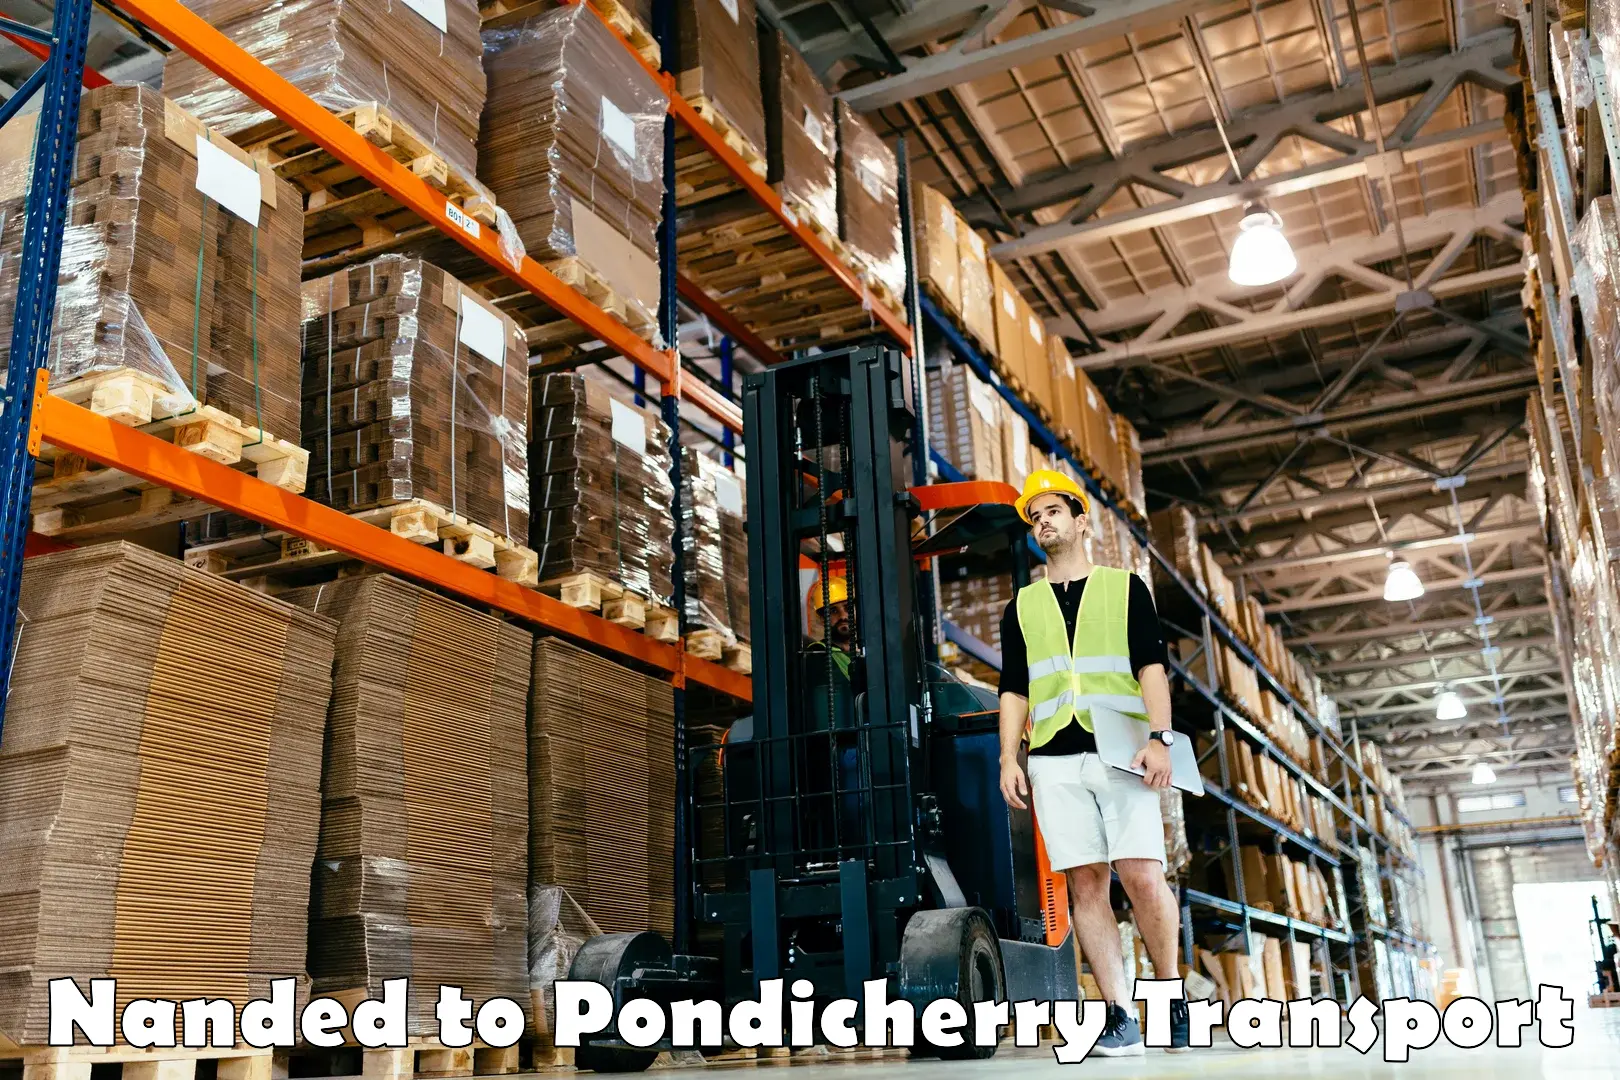 Lorry transport service Nanded to Pondicherry